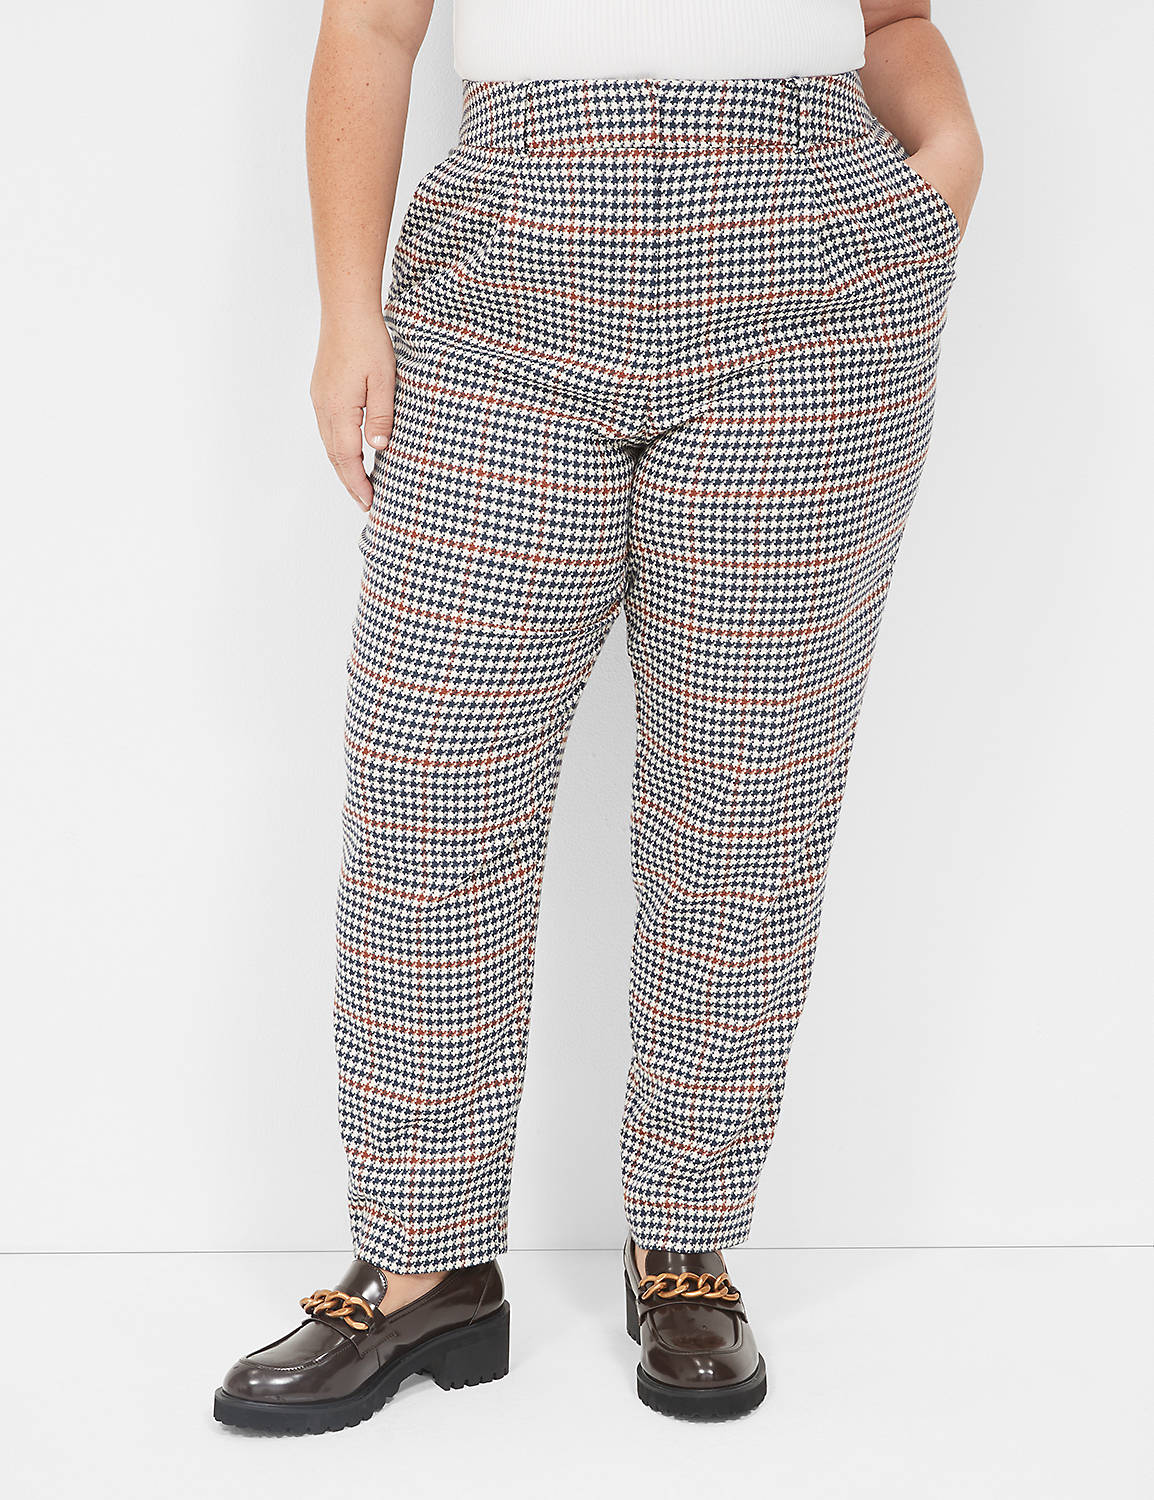 THE PLEATED TAPERED LEG PANT - HOUN Product Image 1